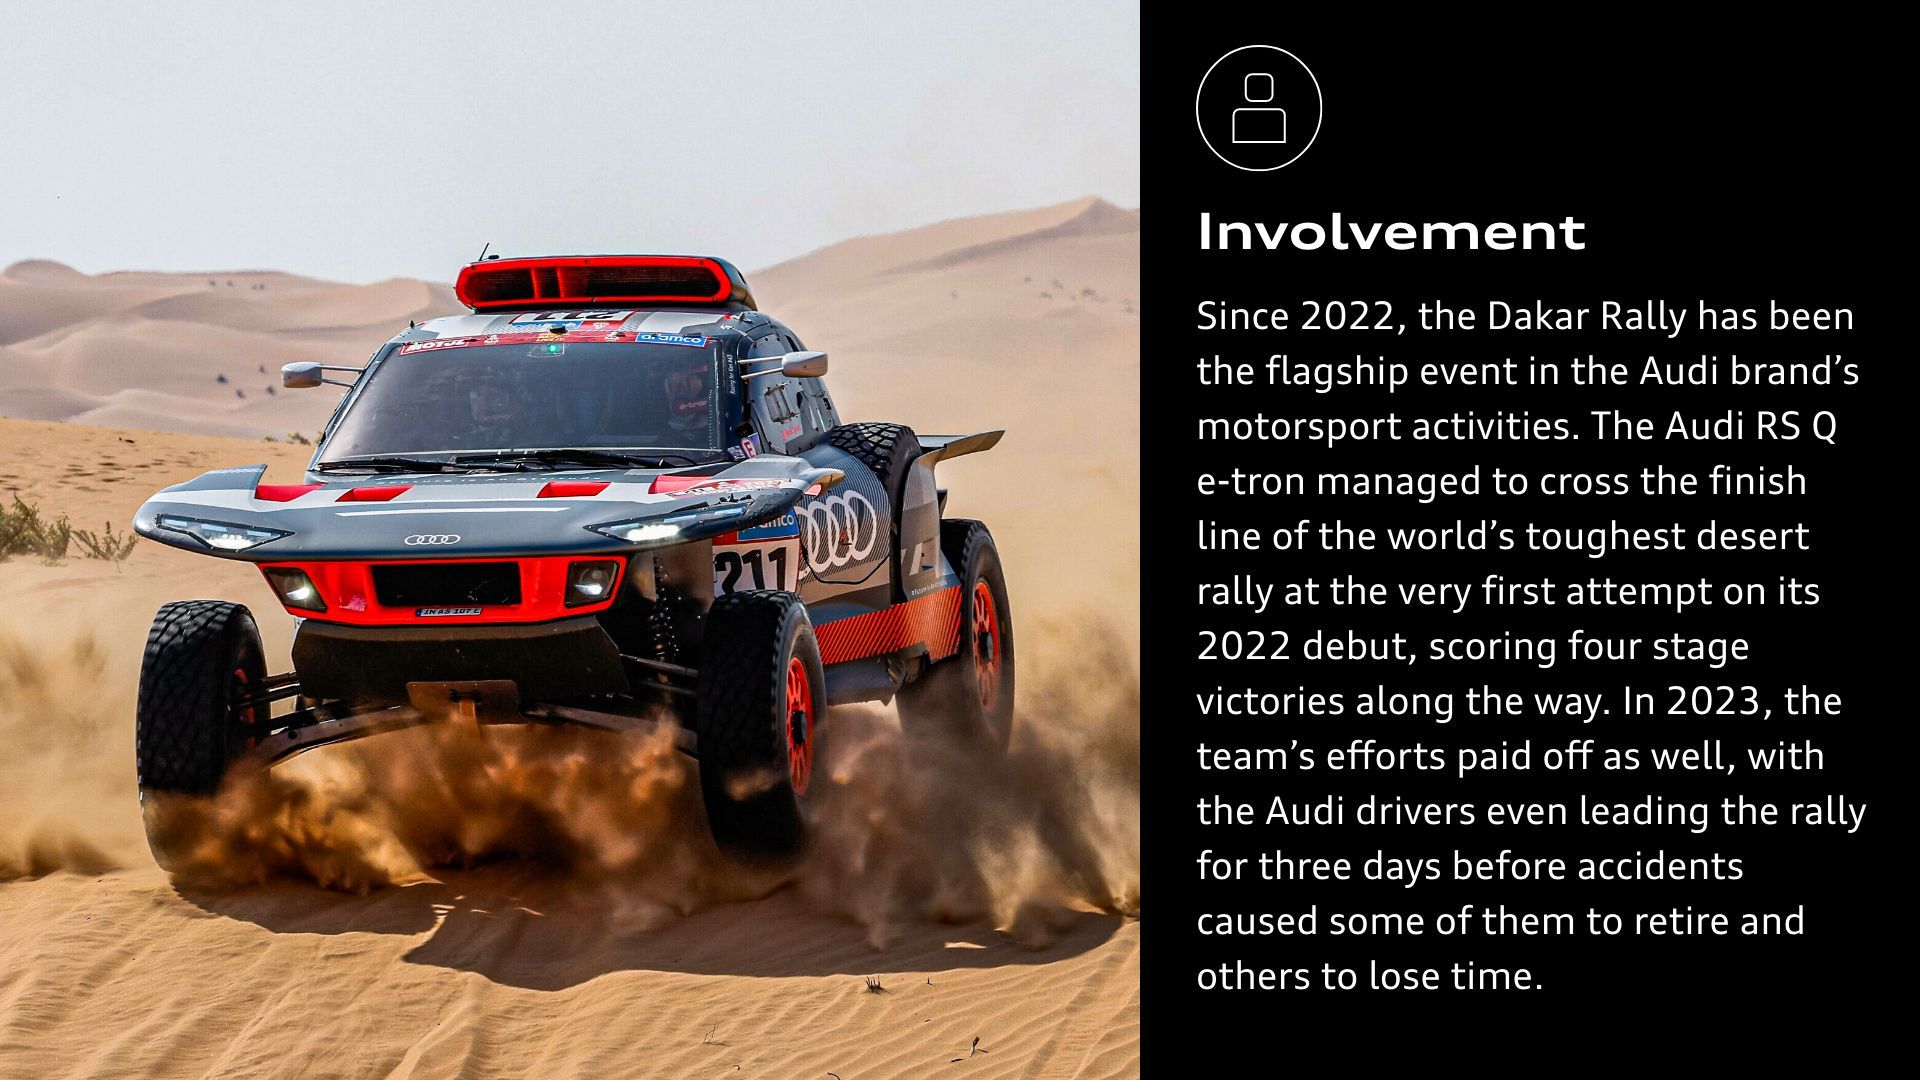 Involvement: Since 2022, the Dakar Rally has been the flagship event in the Audi brand’s motorsport activities. The Audi RS Q e-tron¹ managed to cross the finish line of the world’s toughest desert rally at the very first attempt on its 2022 debut, scoring four stage victories along the way. In 2023, the team’s efforts paid off as well, with the Audi drivers even leading the rally for three days before accidents caused some of them to retire and others to lose time. 